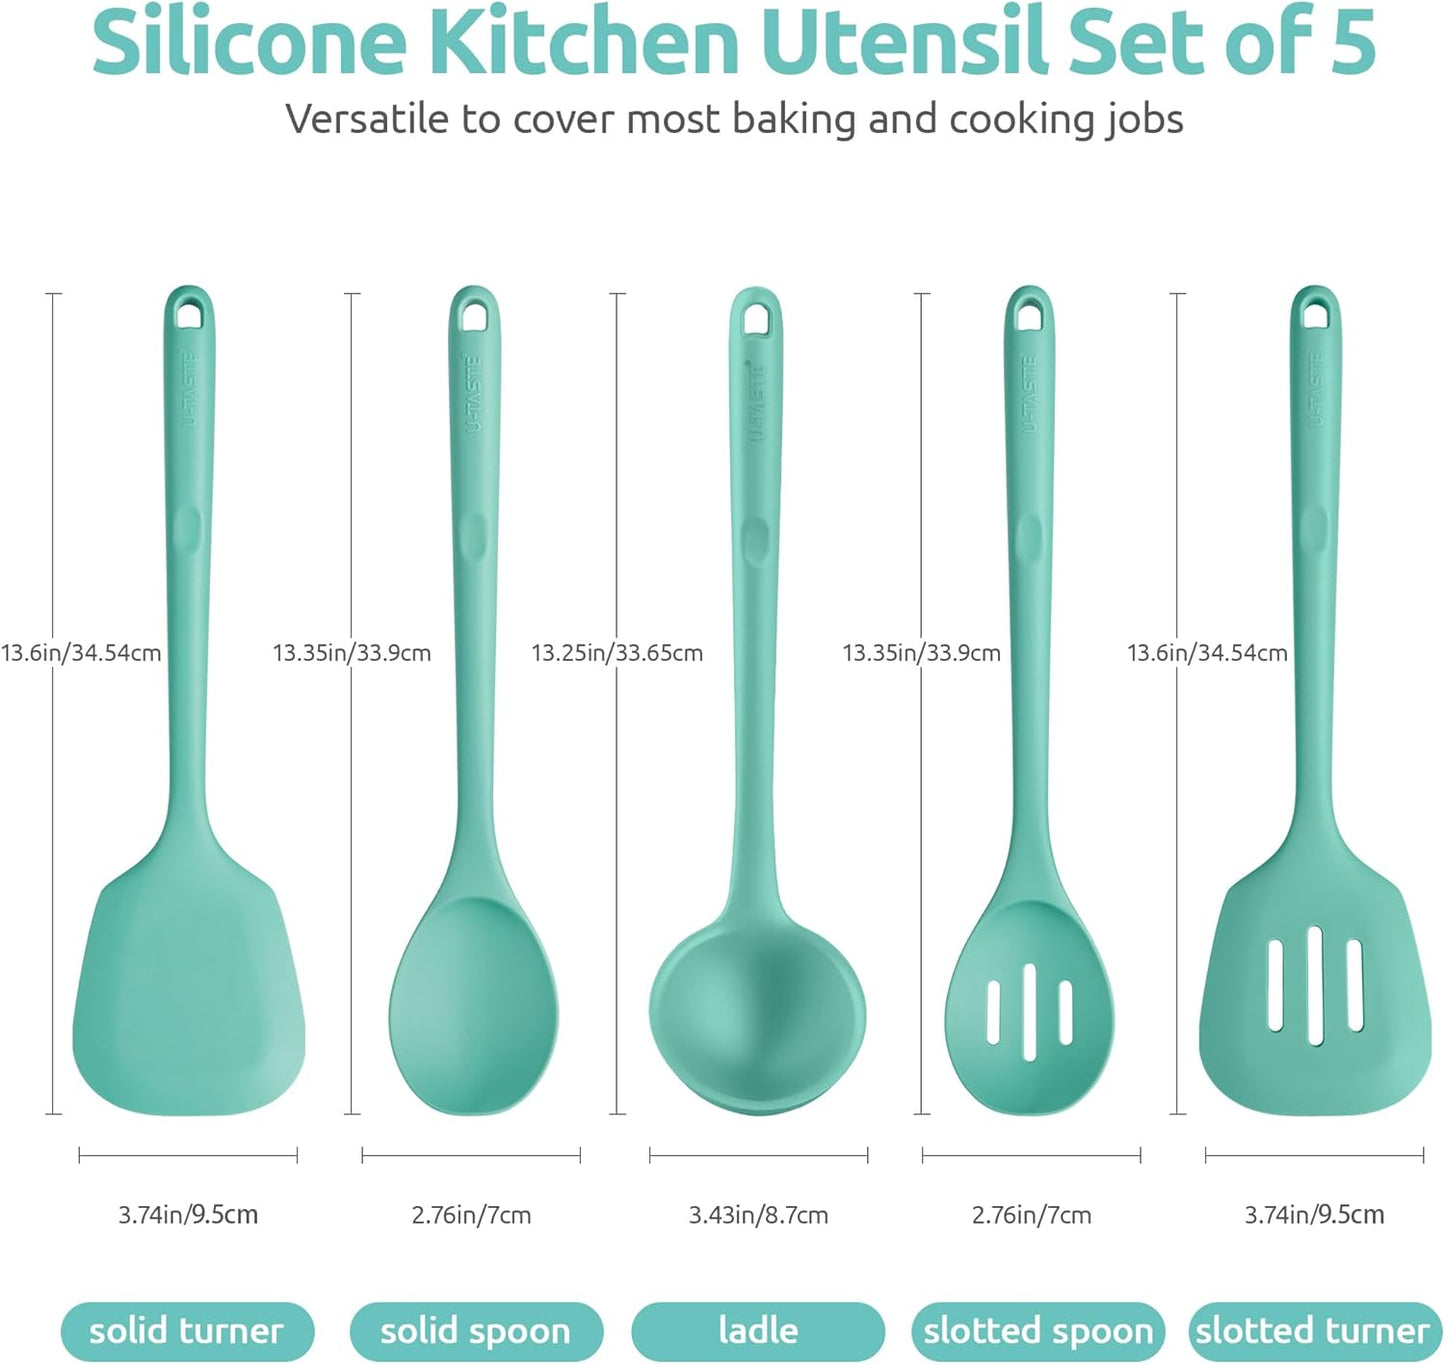 High Heat Resistant Kitchen Utensil:  13.6" Silicone Cooking Tools Gadgets Set, BPA Free Non Stick Solid and Slotted Turner Spatula, Mixing Spoon, and Soup Ladle (5 Pieces, Aqua Sky)